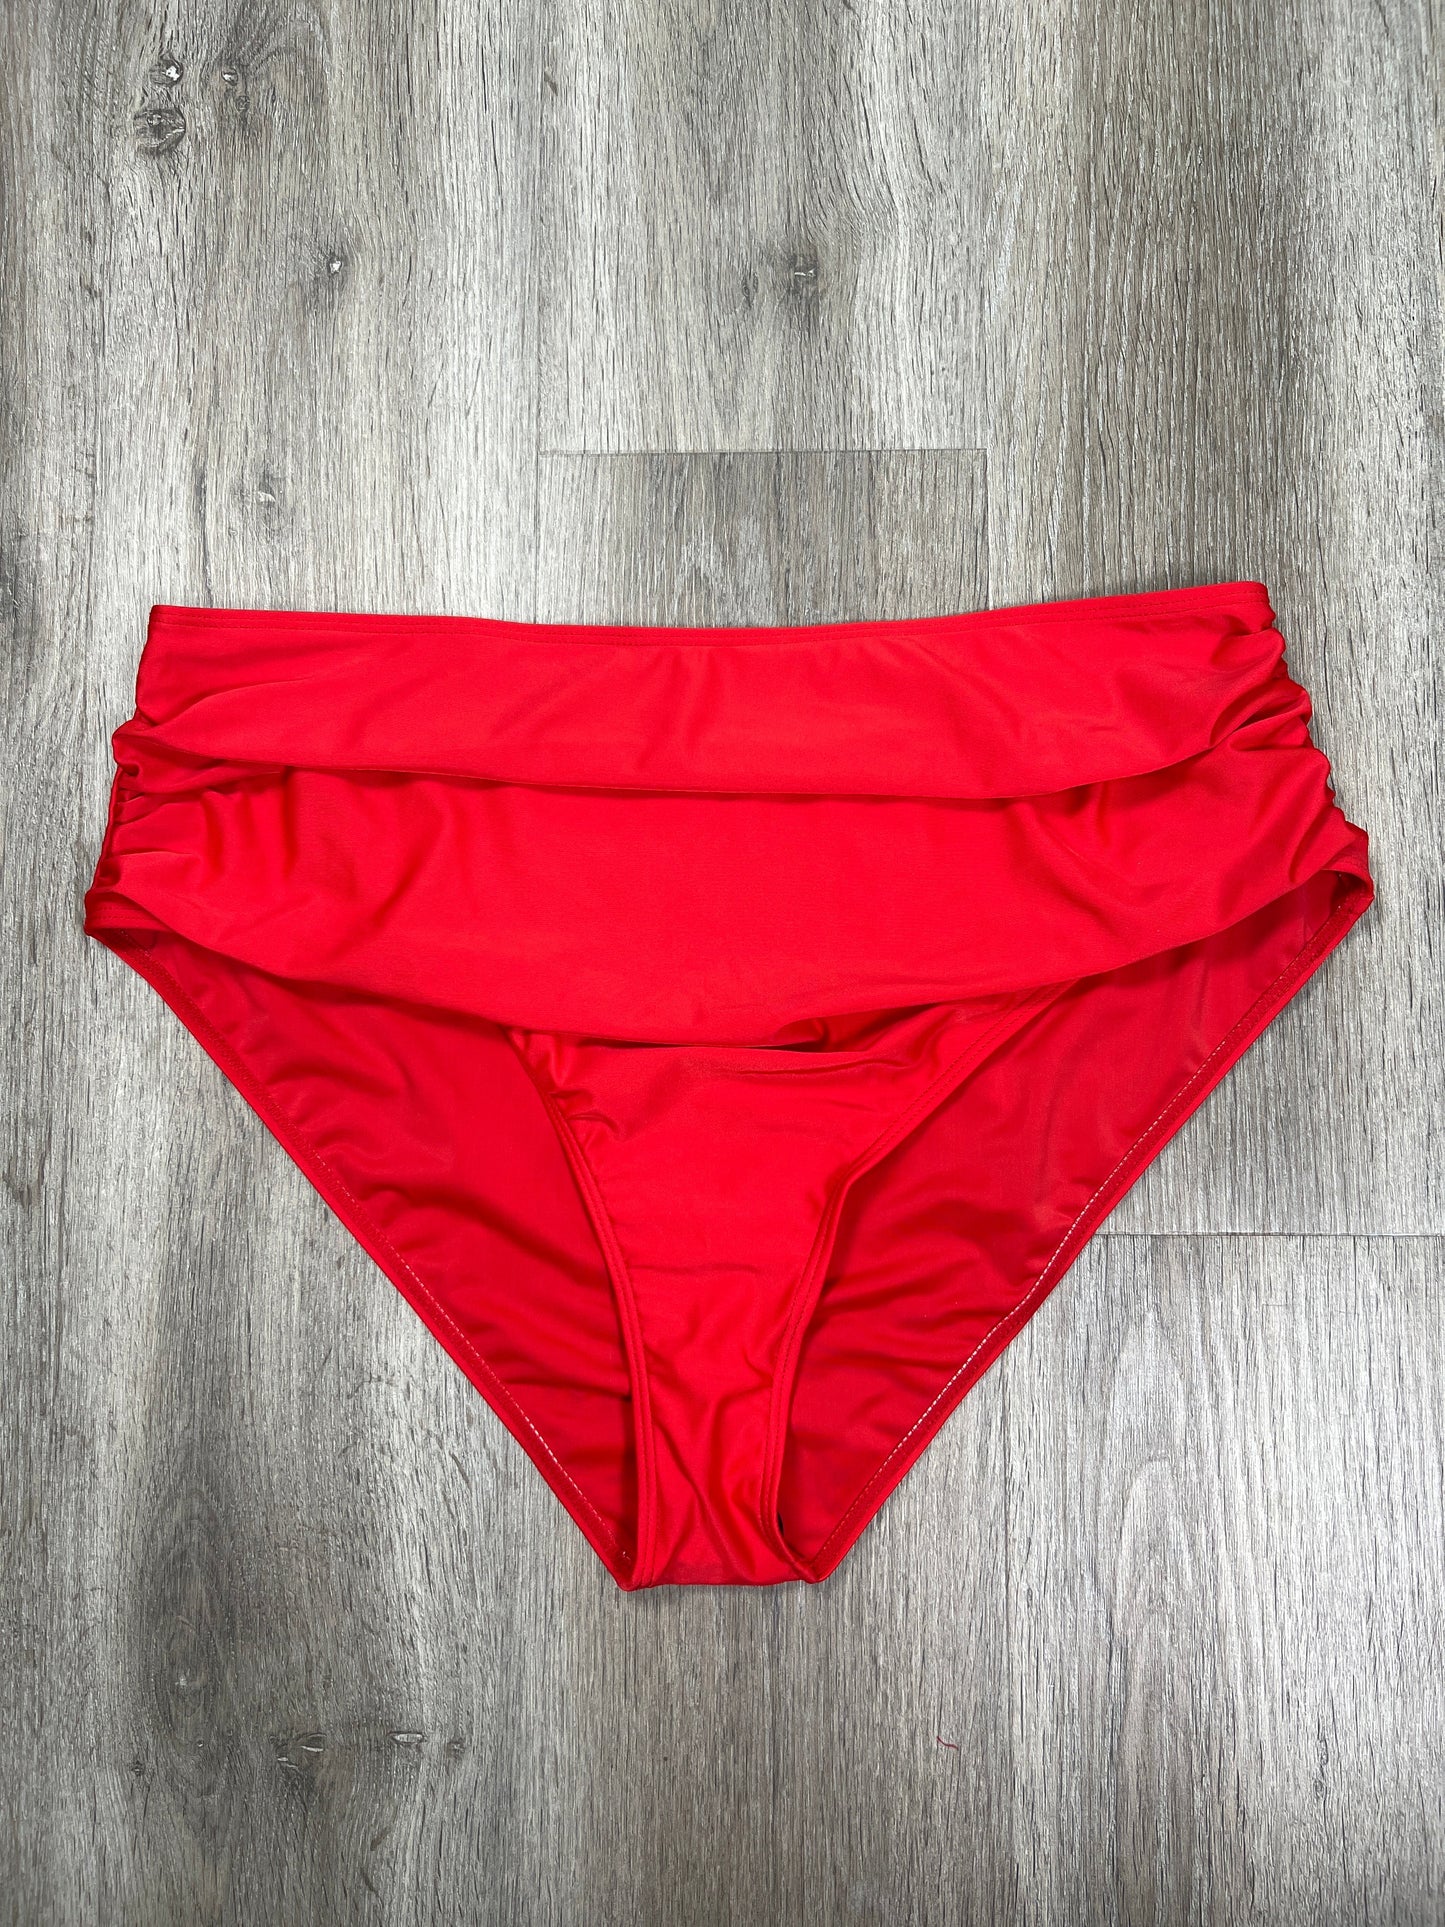 Red Swimsuit Bottom Shein, Size 3x